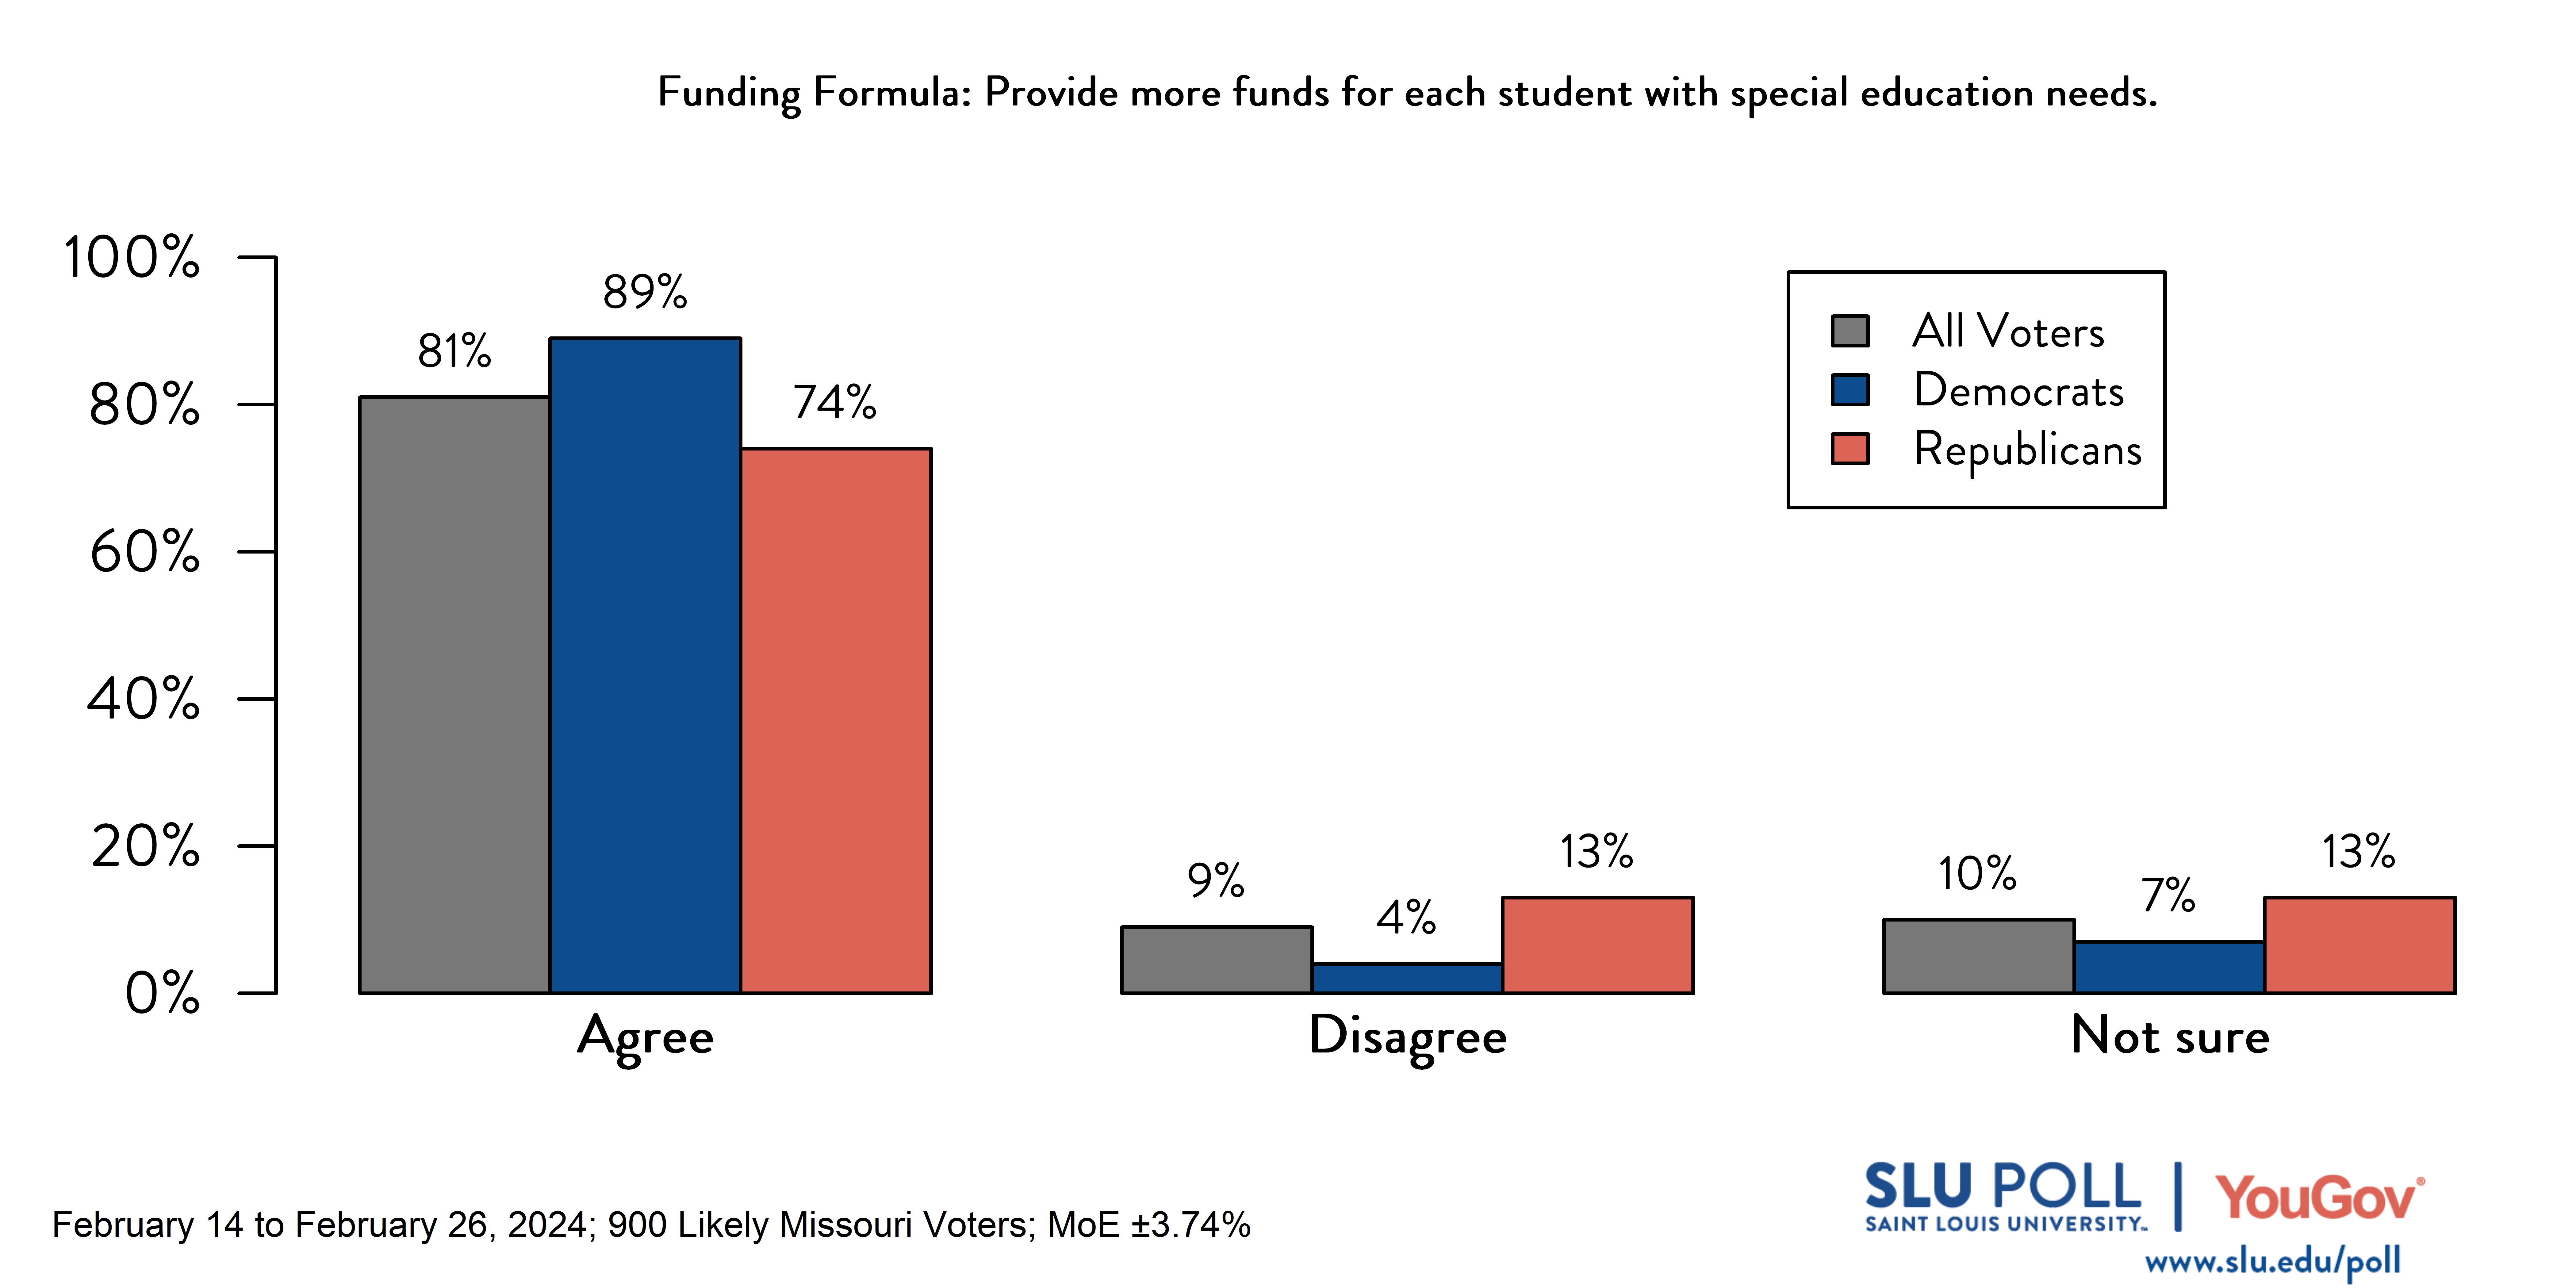 Likely voters' responses to 'Do you agree or disagree that this funding formula should do the following…Provide more funds for each student with special education needs?': 81% Agree, 9% Disagree, and 10% Not Sure. Democratic voters' responses: ' 89% Agree, 4% Disagree, and 7% Not Sure. Republican voters' responses:  74% Agree, 13% Disagree, and 13% Not Sure.